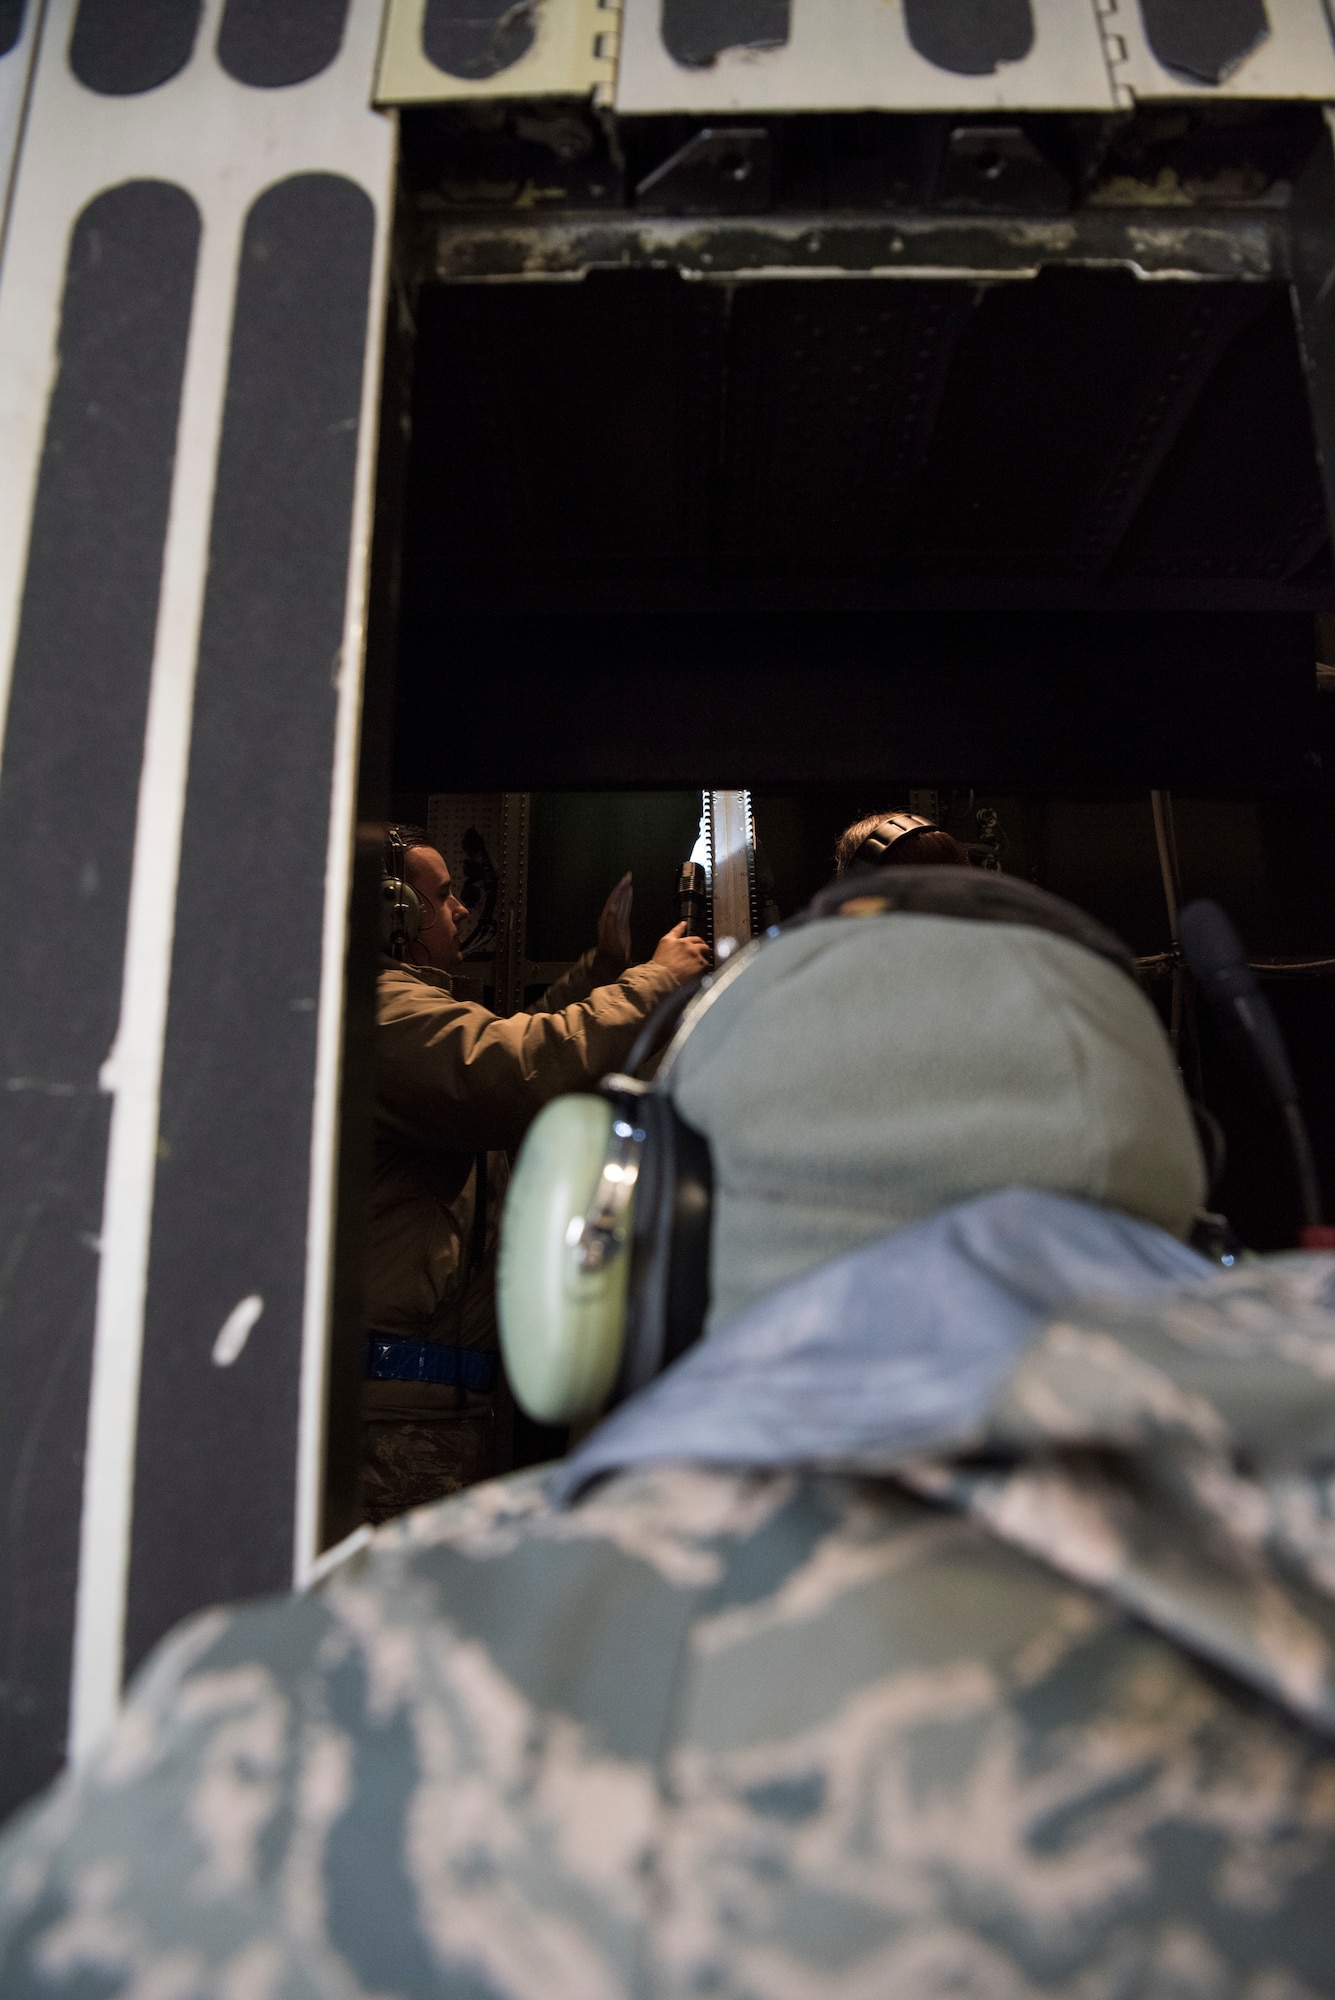 Staff Sgt. Ryan Johnson (back), 521st Air Mobility Operations Wing regional training center crew chief instructor, demonstrates the inspection of the visor guide roller aboard a C-5M Super Galaxy aircraft at Ramstein Air Base, Germany, Nov. 29, 2018. The nose visor on a C-5 lifts to expose a front cargo door, a feature unique to the airframe. (U.S. Air Force photo by Staff Sgt. Aaron J. Jenne)